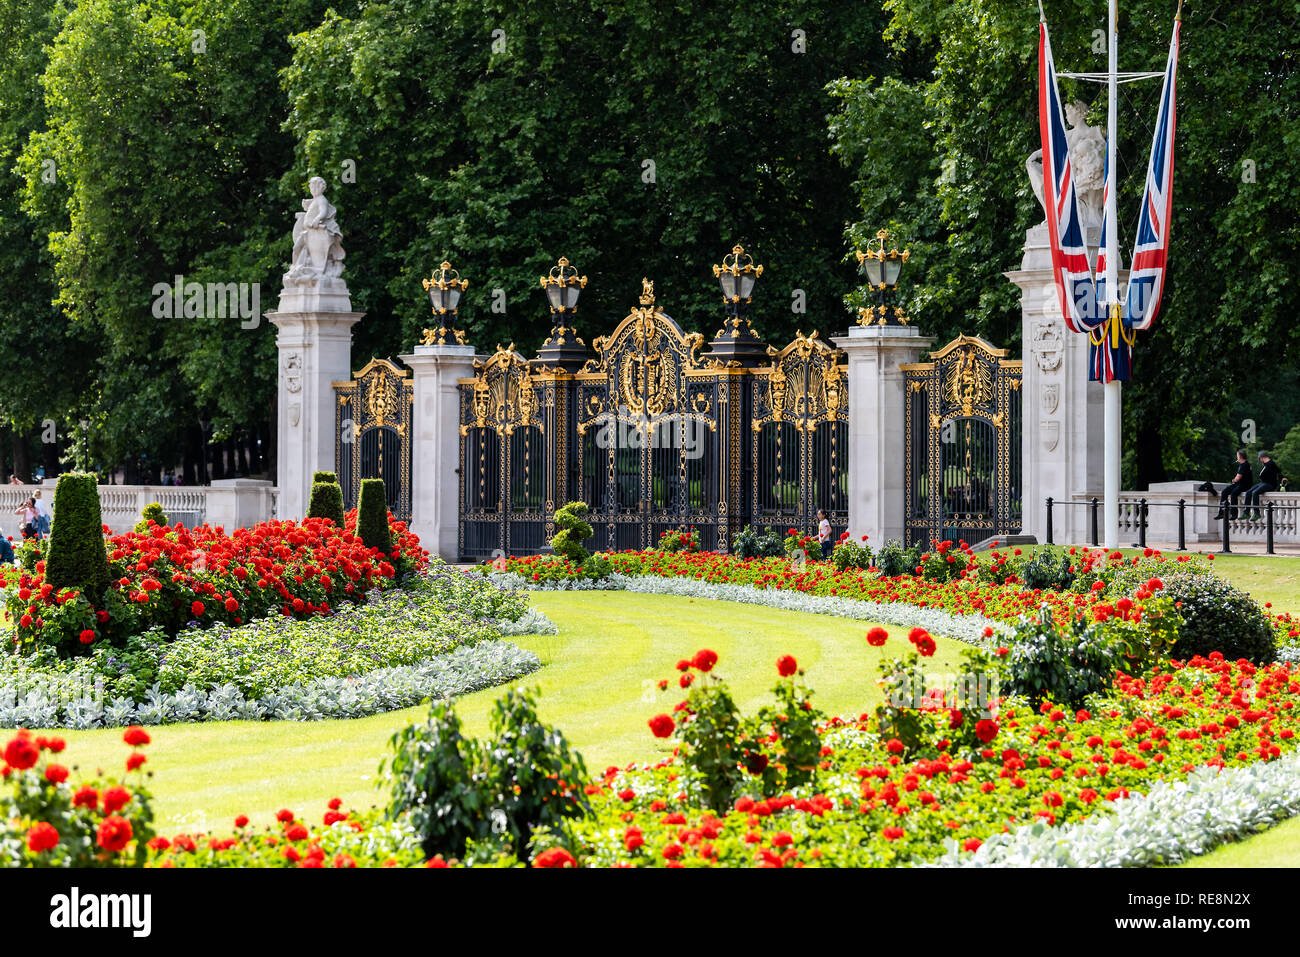 London, UK - June 21, 2018: Buckingham Palace fence gate architecture and flags during summer day with red rose flower landscaped garden Stock Photo